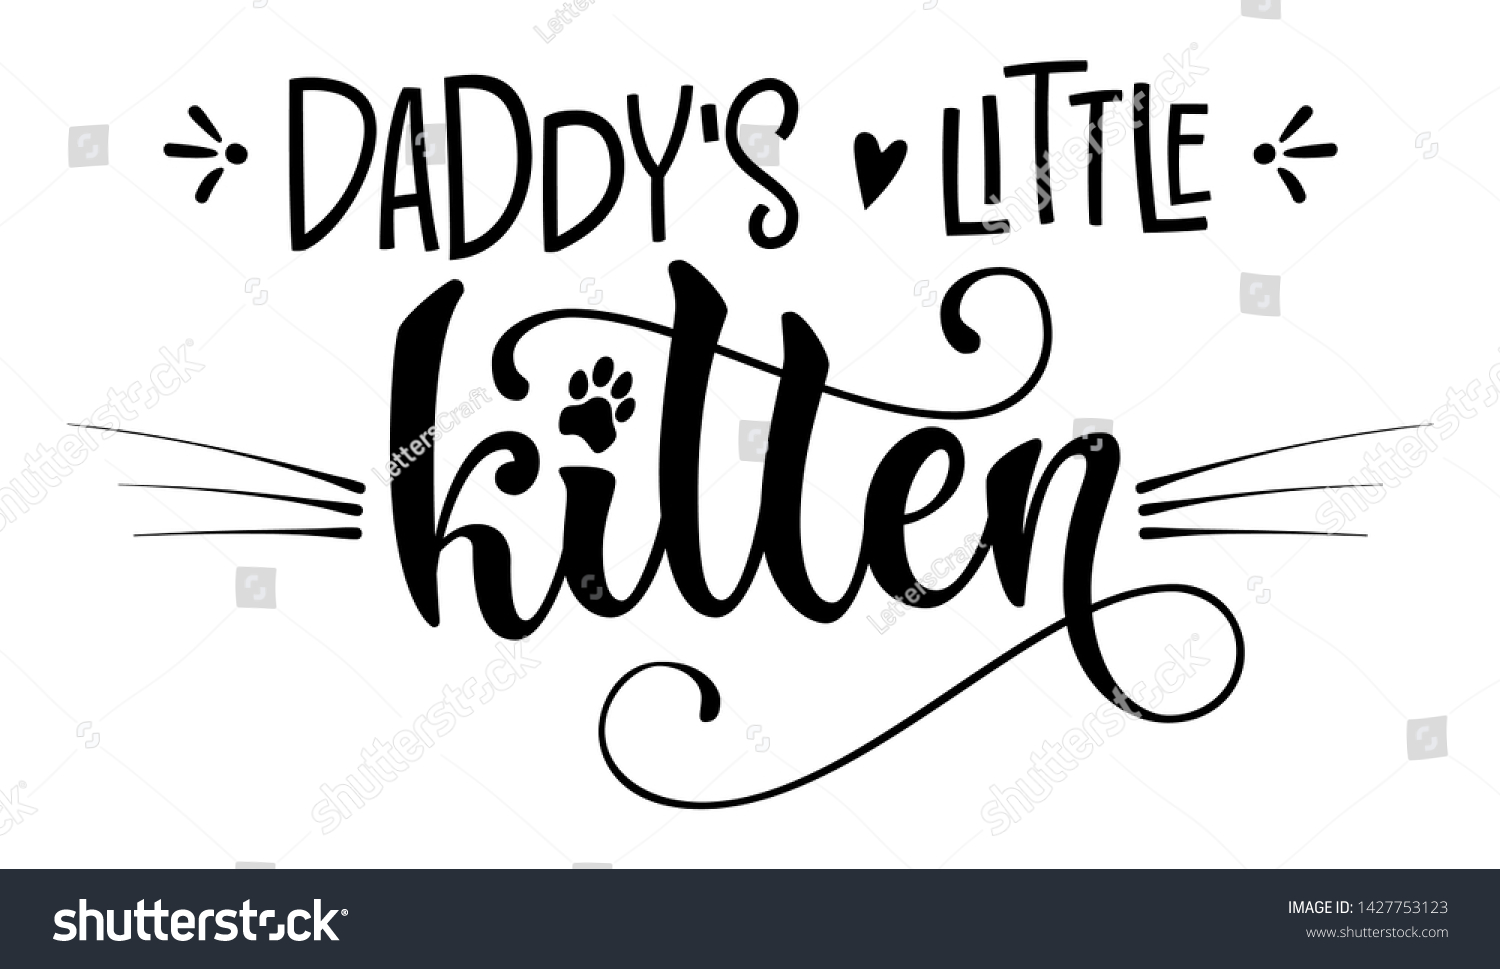 And kitten daddy 